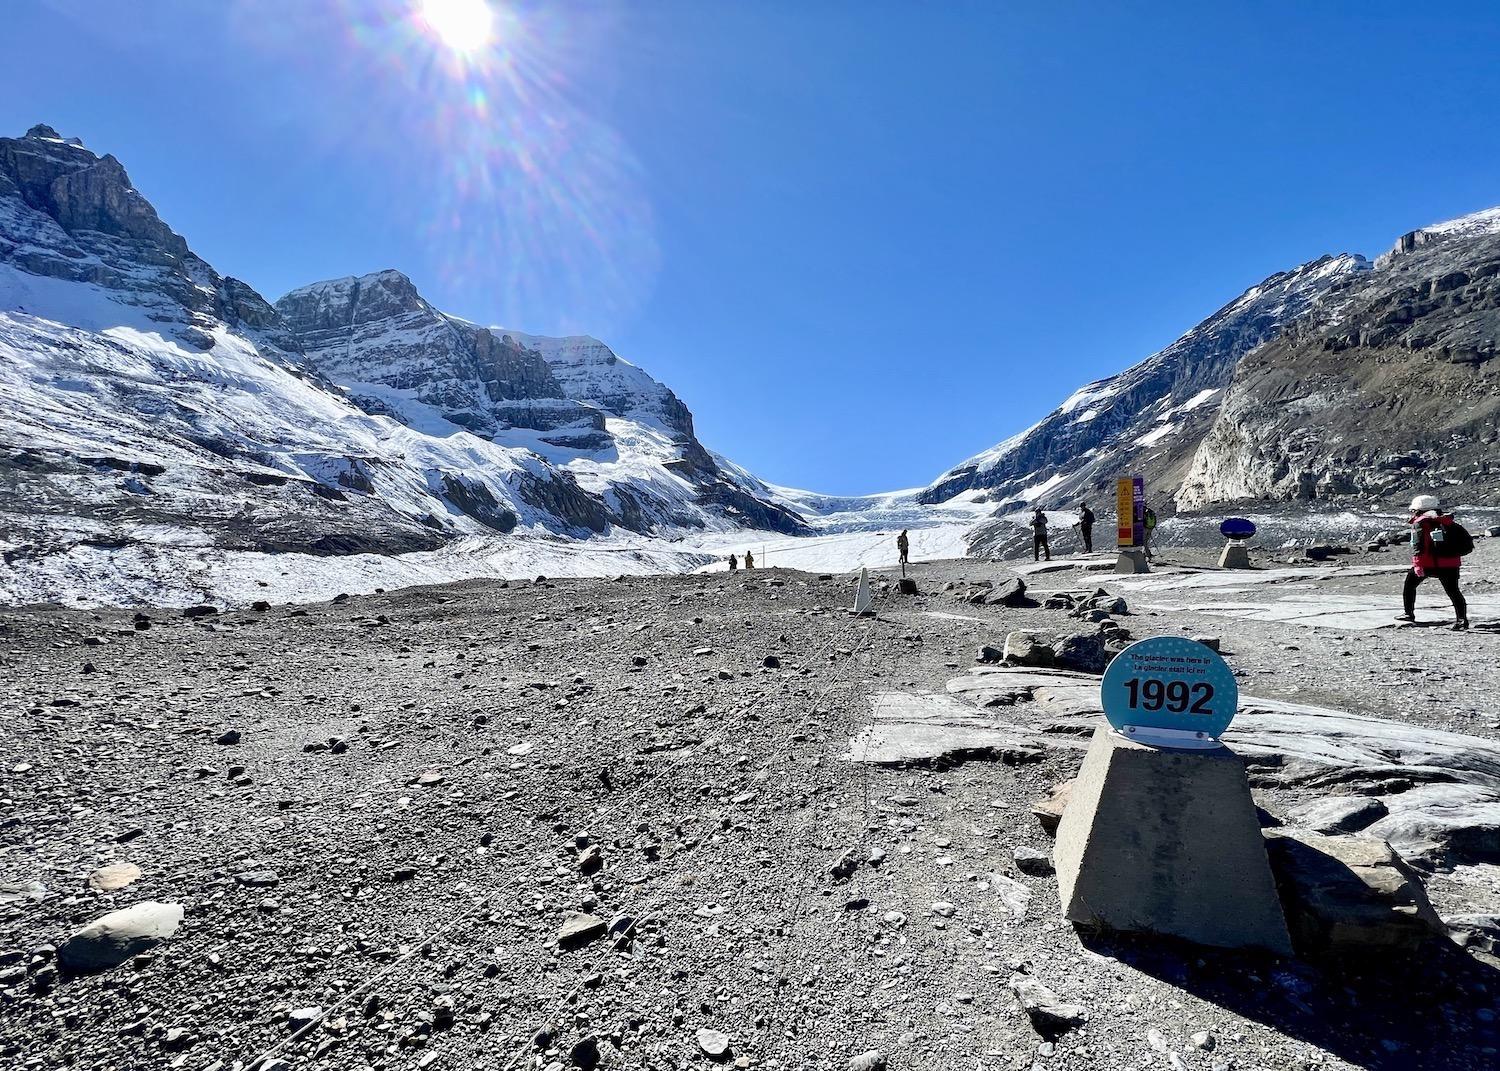 A small sign marks where the Athabasca Glacier was in 1992, as visitors walk freely on the right and visitors with guides access a restricted area on the left.